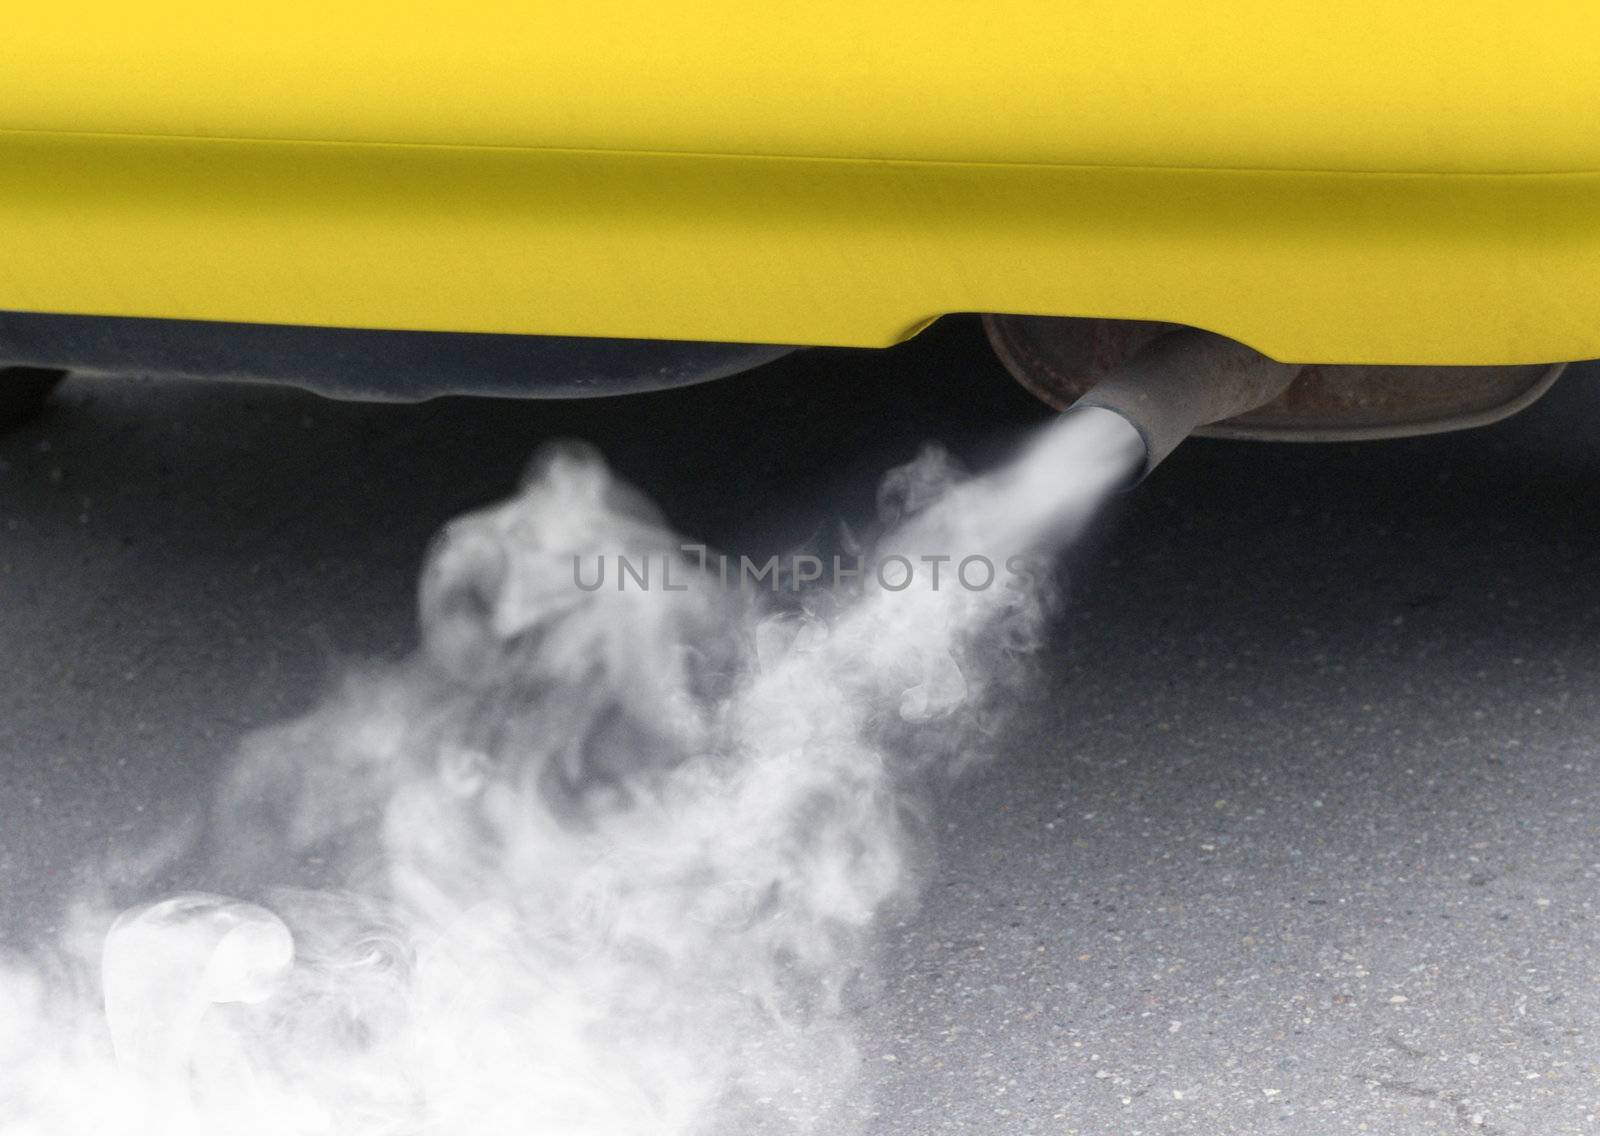 pollution of environment by combustible gas of a car